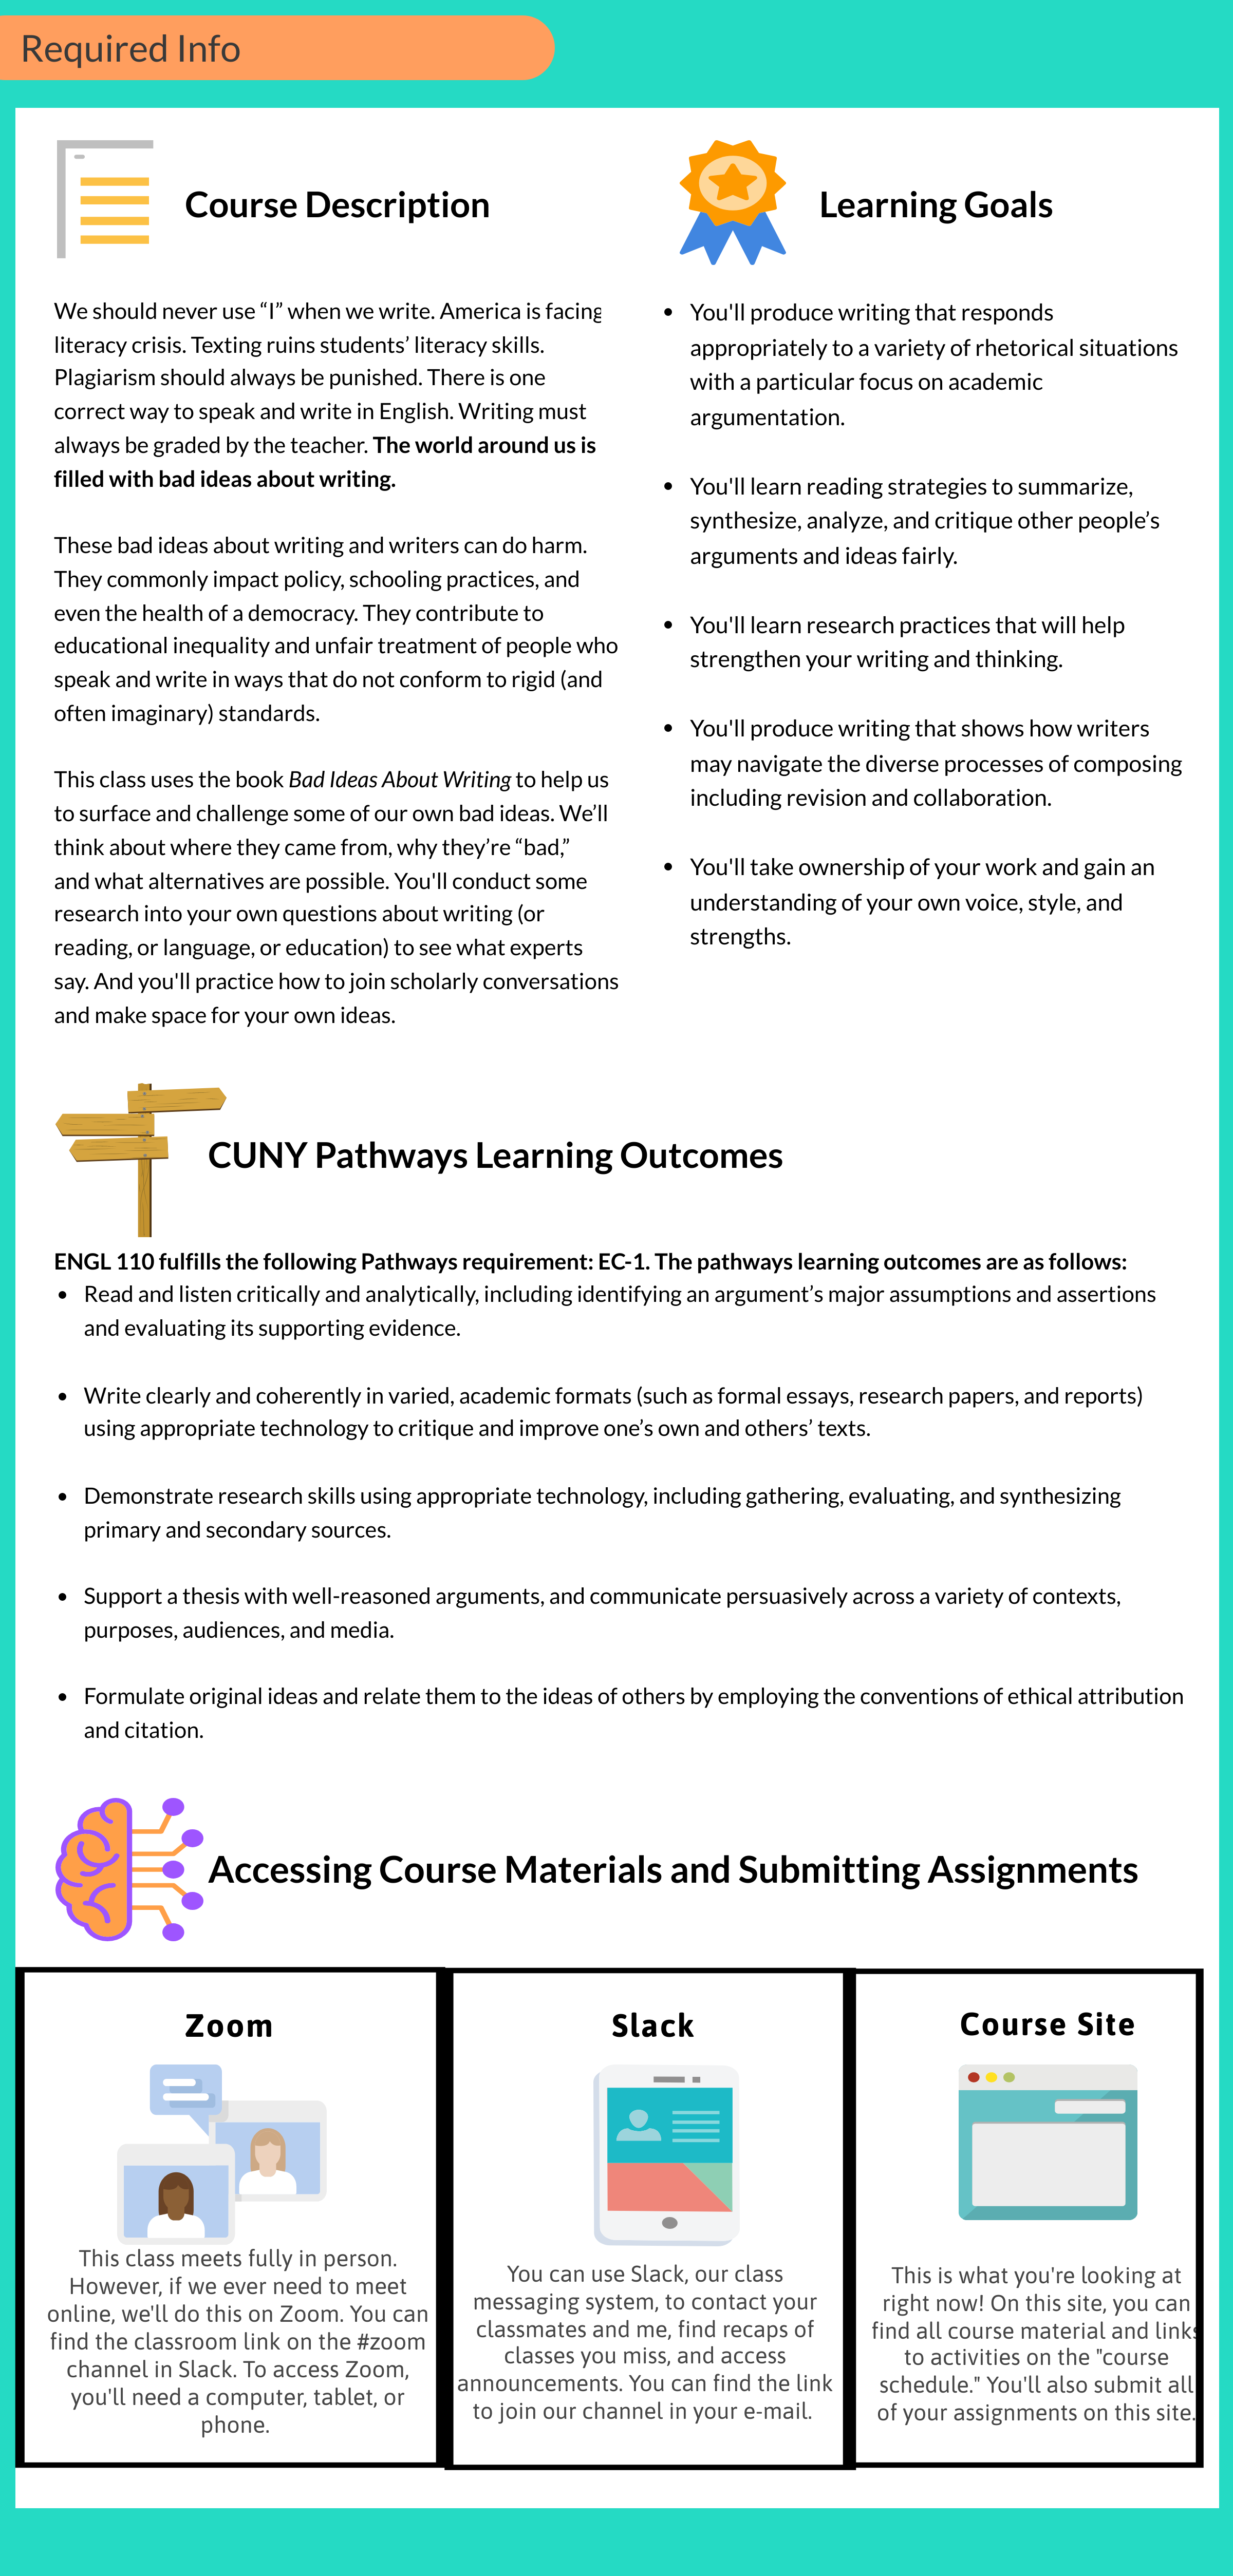 Learning goals, the course description, CUNY Pathways learning outcomes, and information on how to access course materials and submit assignments. 